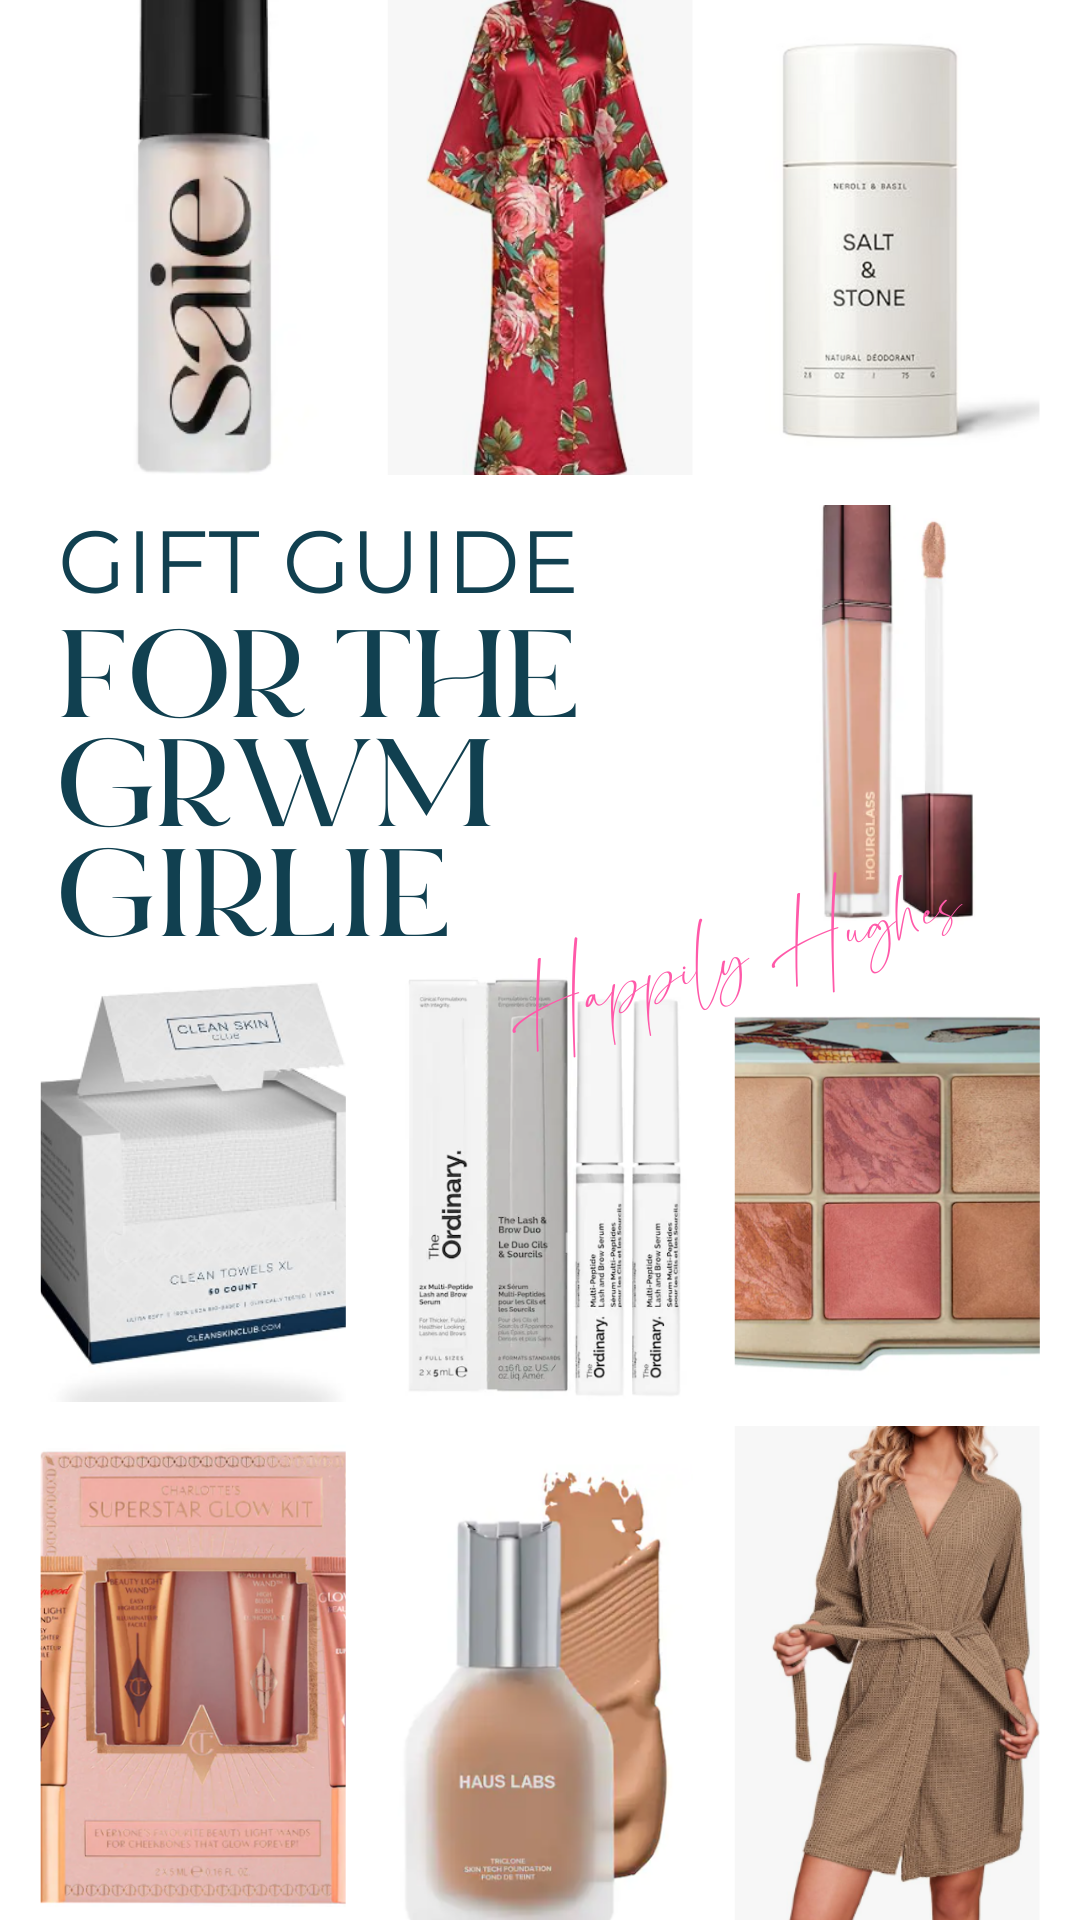 Top 10 gift ideas for those who love beauty, makeup and skincare